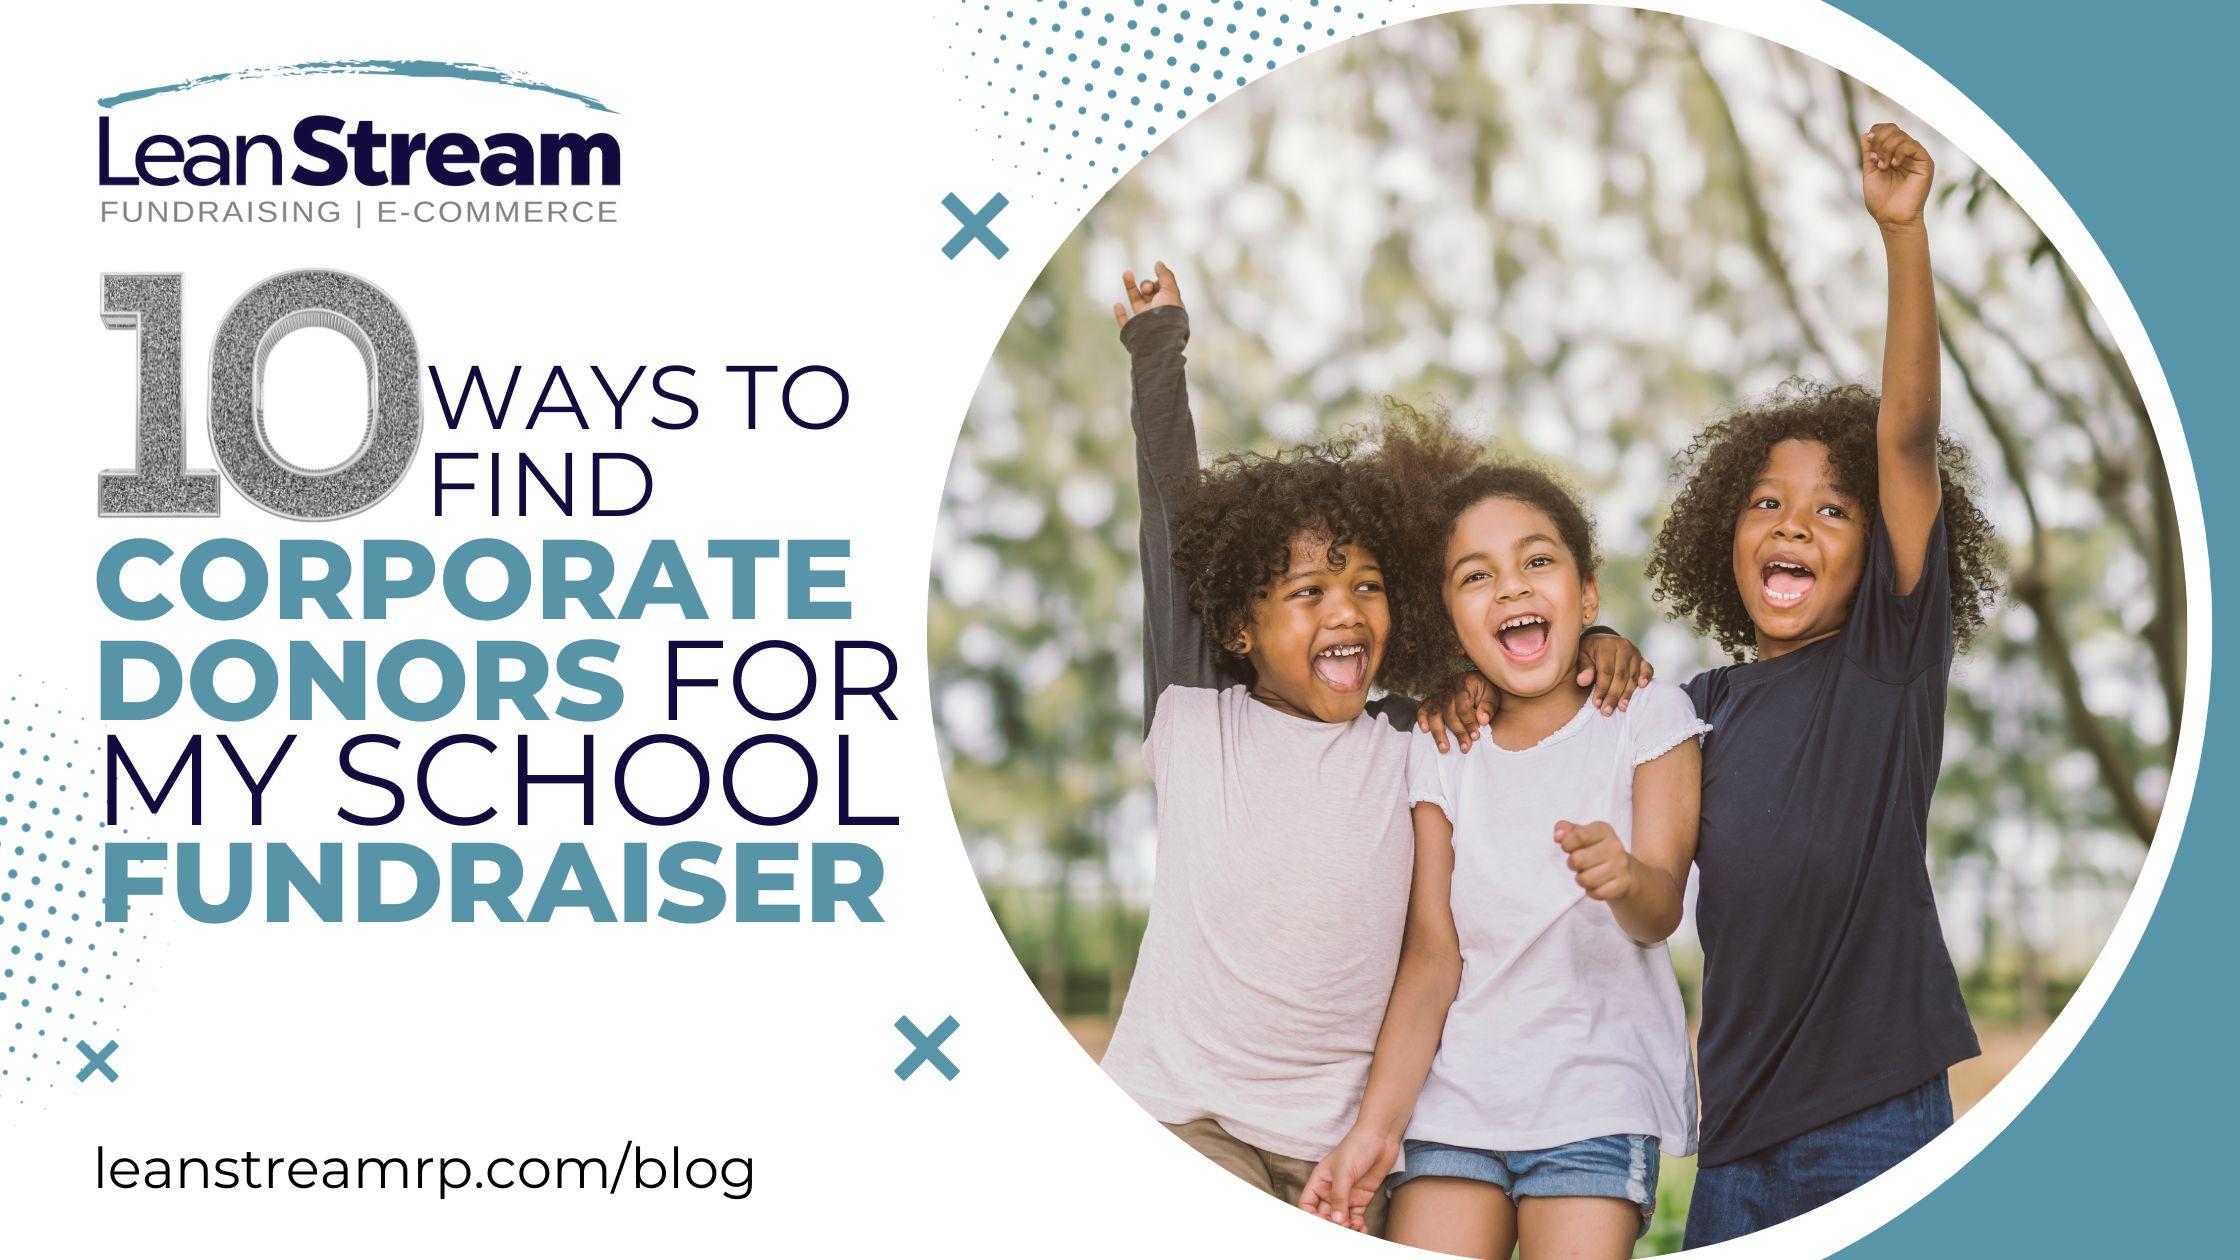 LeanStream Blog - 10 Ways to Find Corporate Donors for School Fundraisers